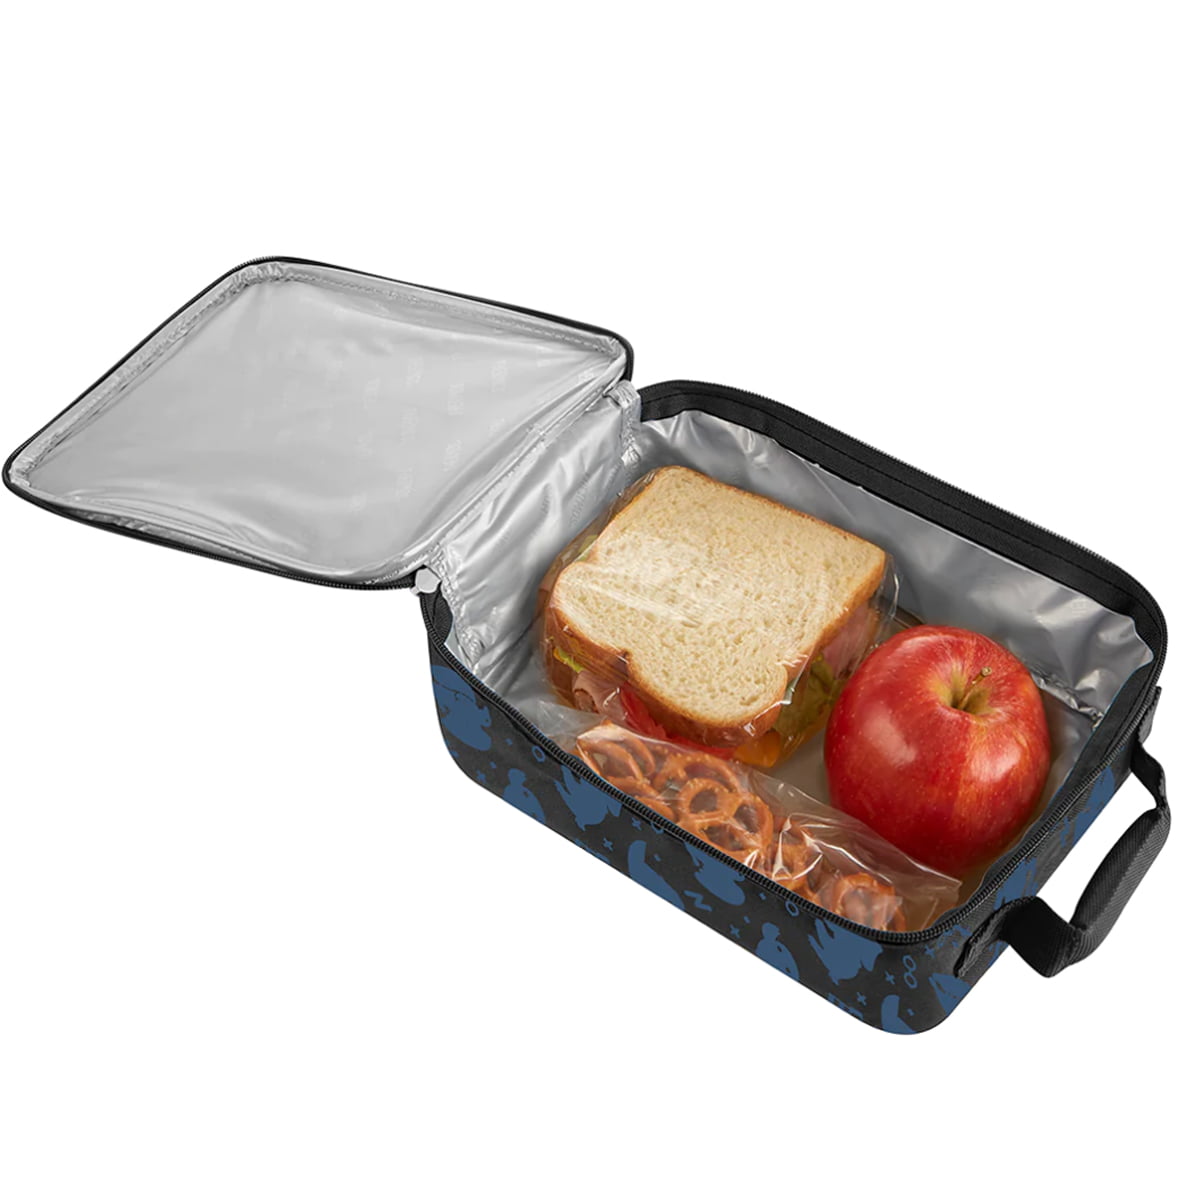 Get Smart Lunch Box & Thermos – MFP